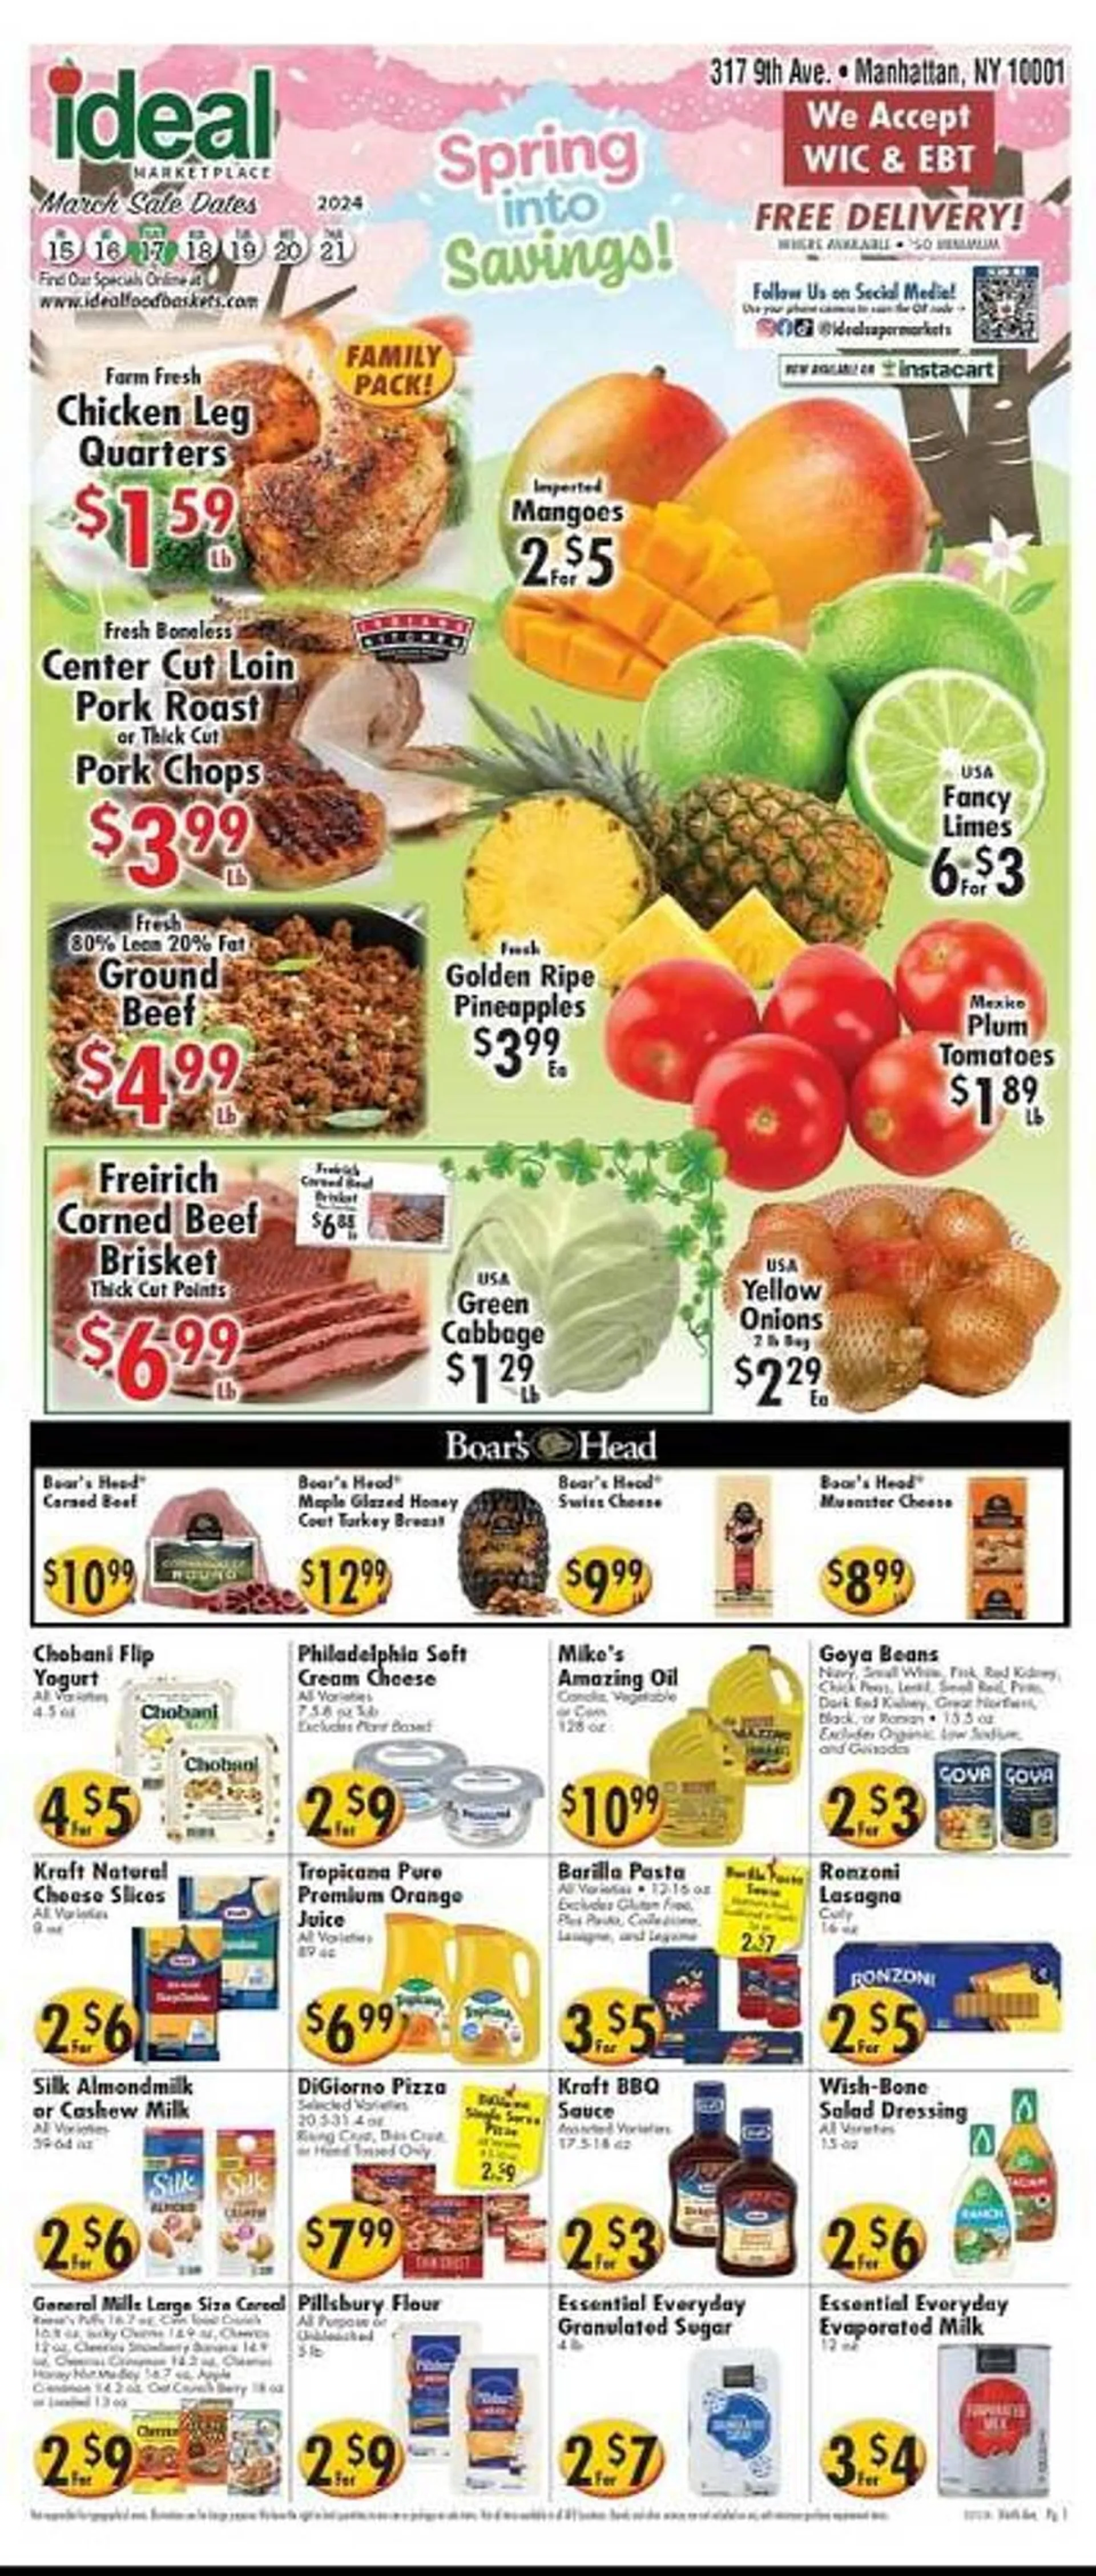 Weekly ad Ideal Food Basket Weekly Ad from March 15 to March 21 2024 - Page 1